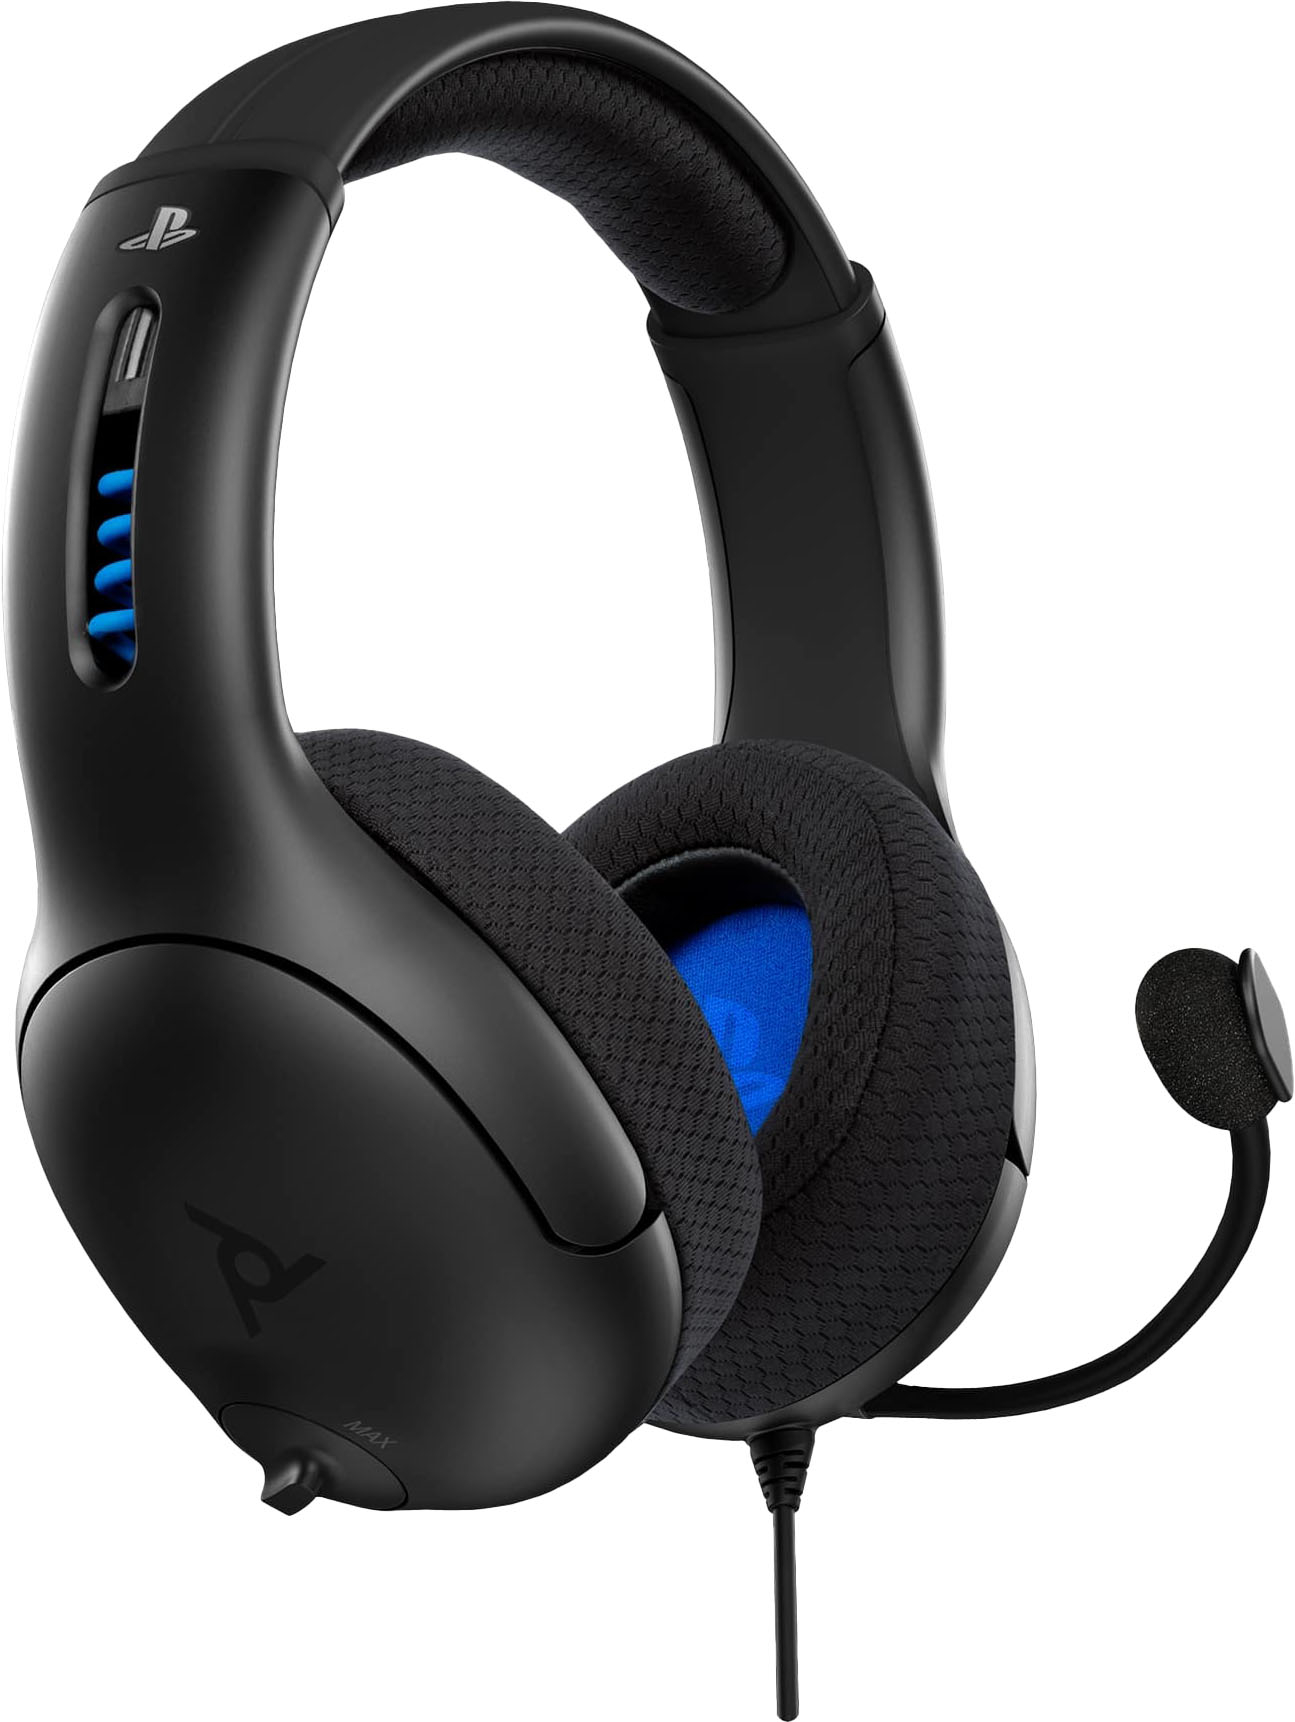 Angle View: PDP - LVL50 Wired Stereo Gaming Headset for PlayStation - Black - Black